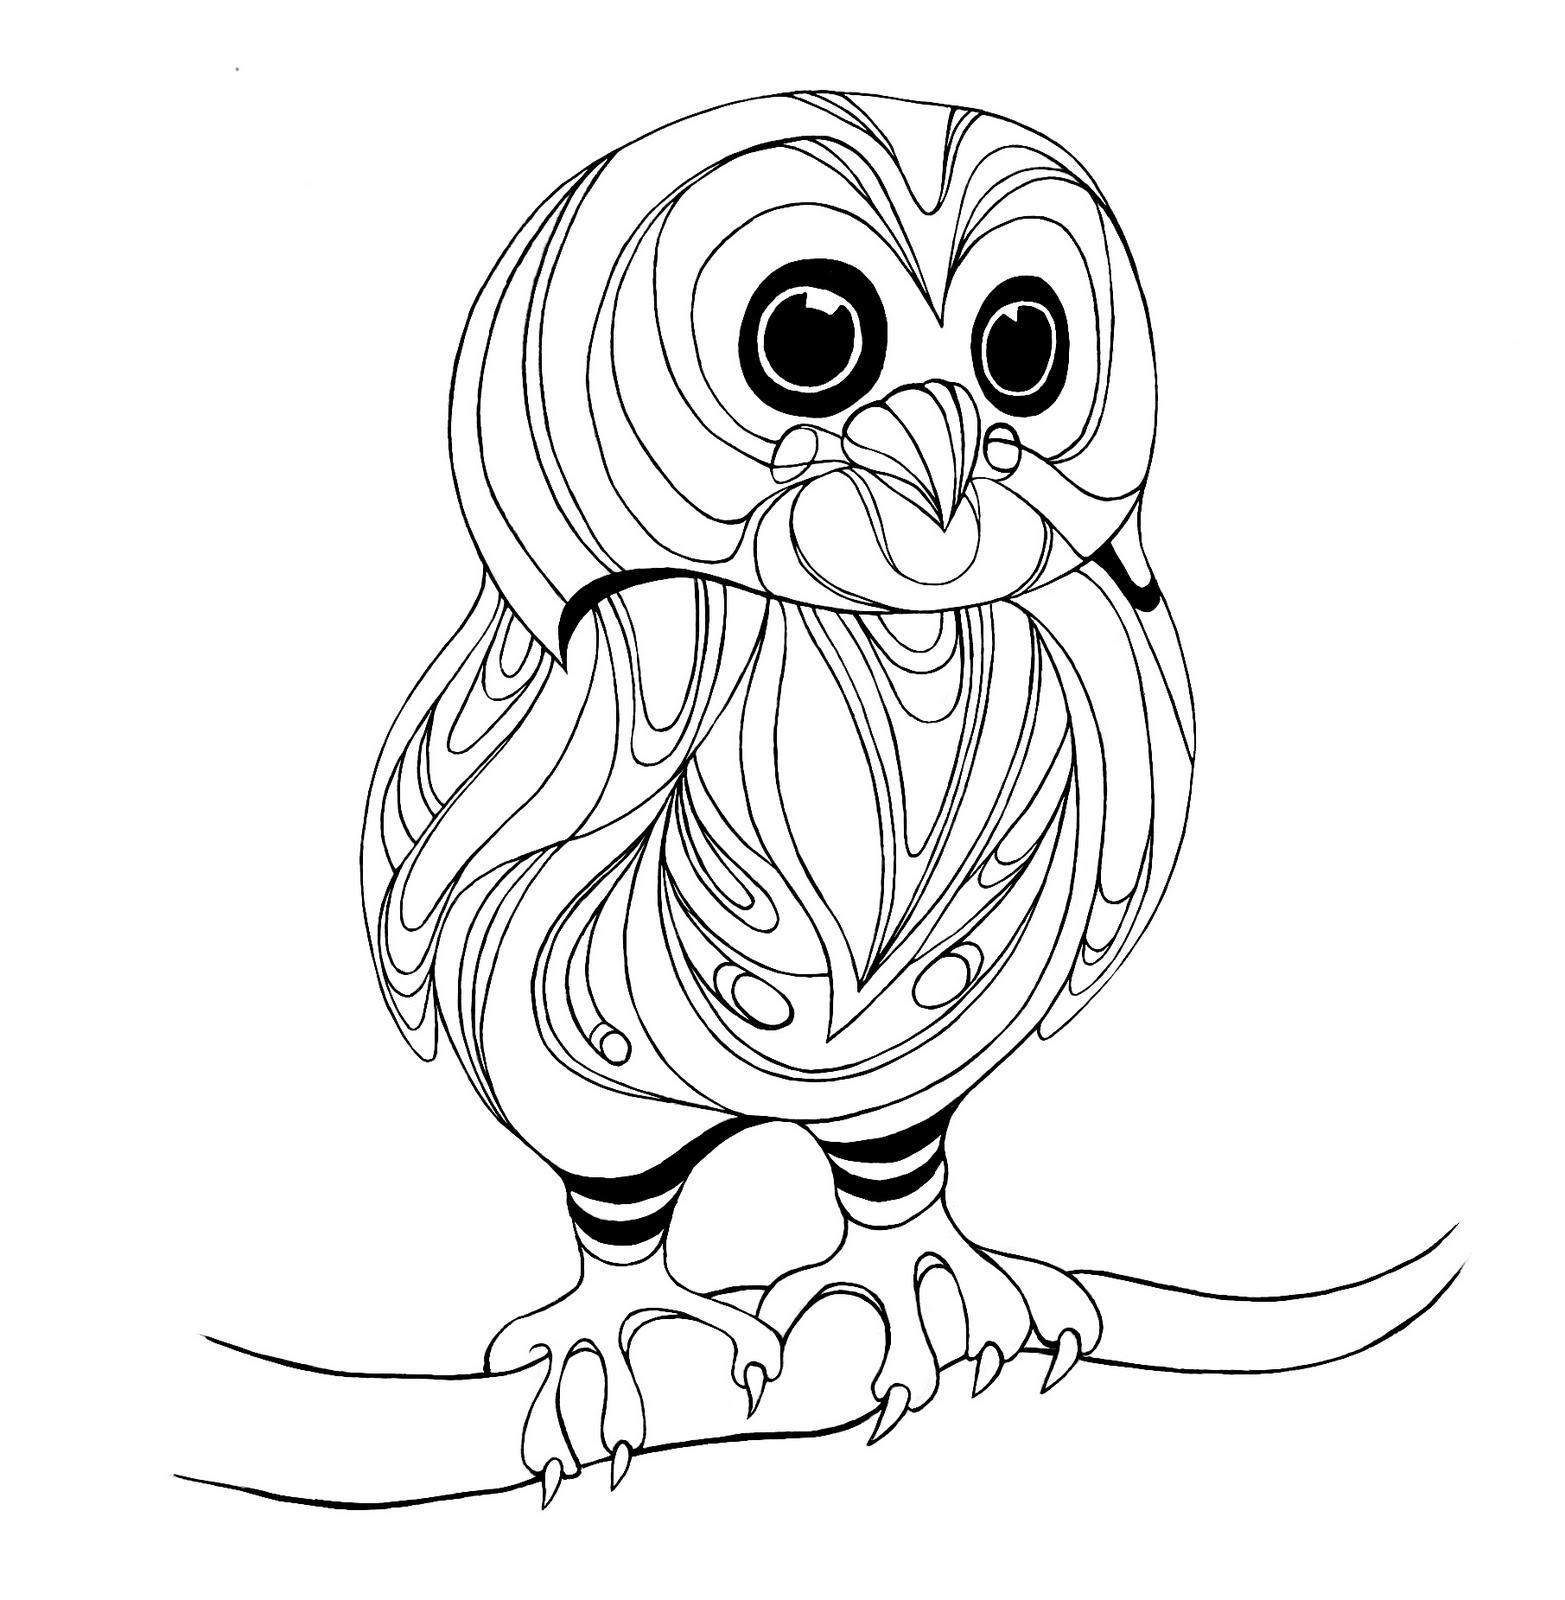 Drawing Owl #8584 (Animals) – Printable coloring pages